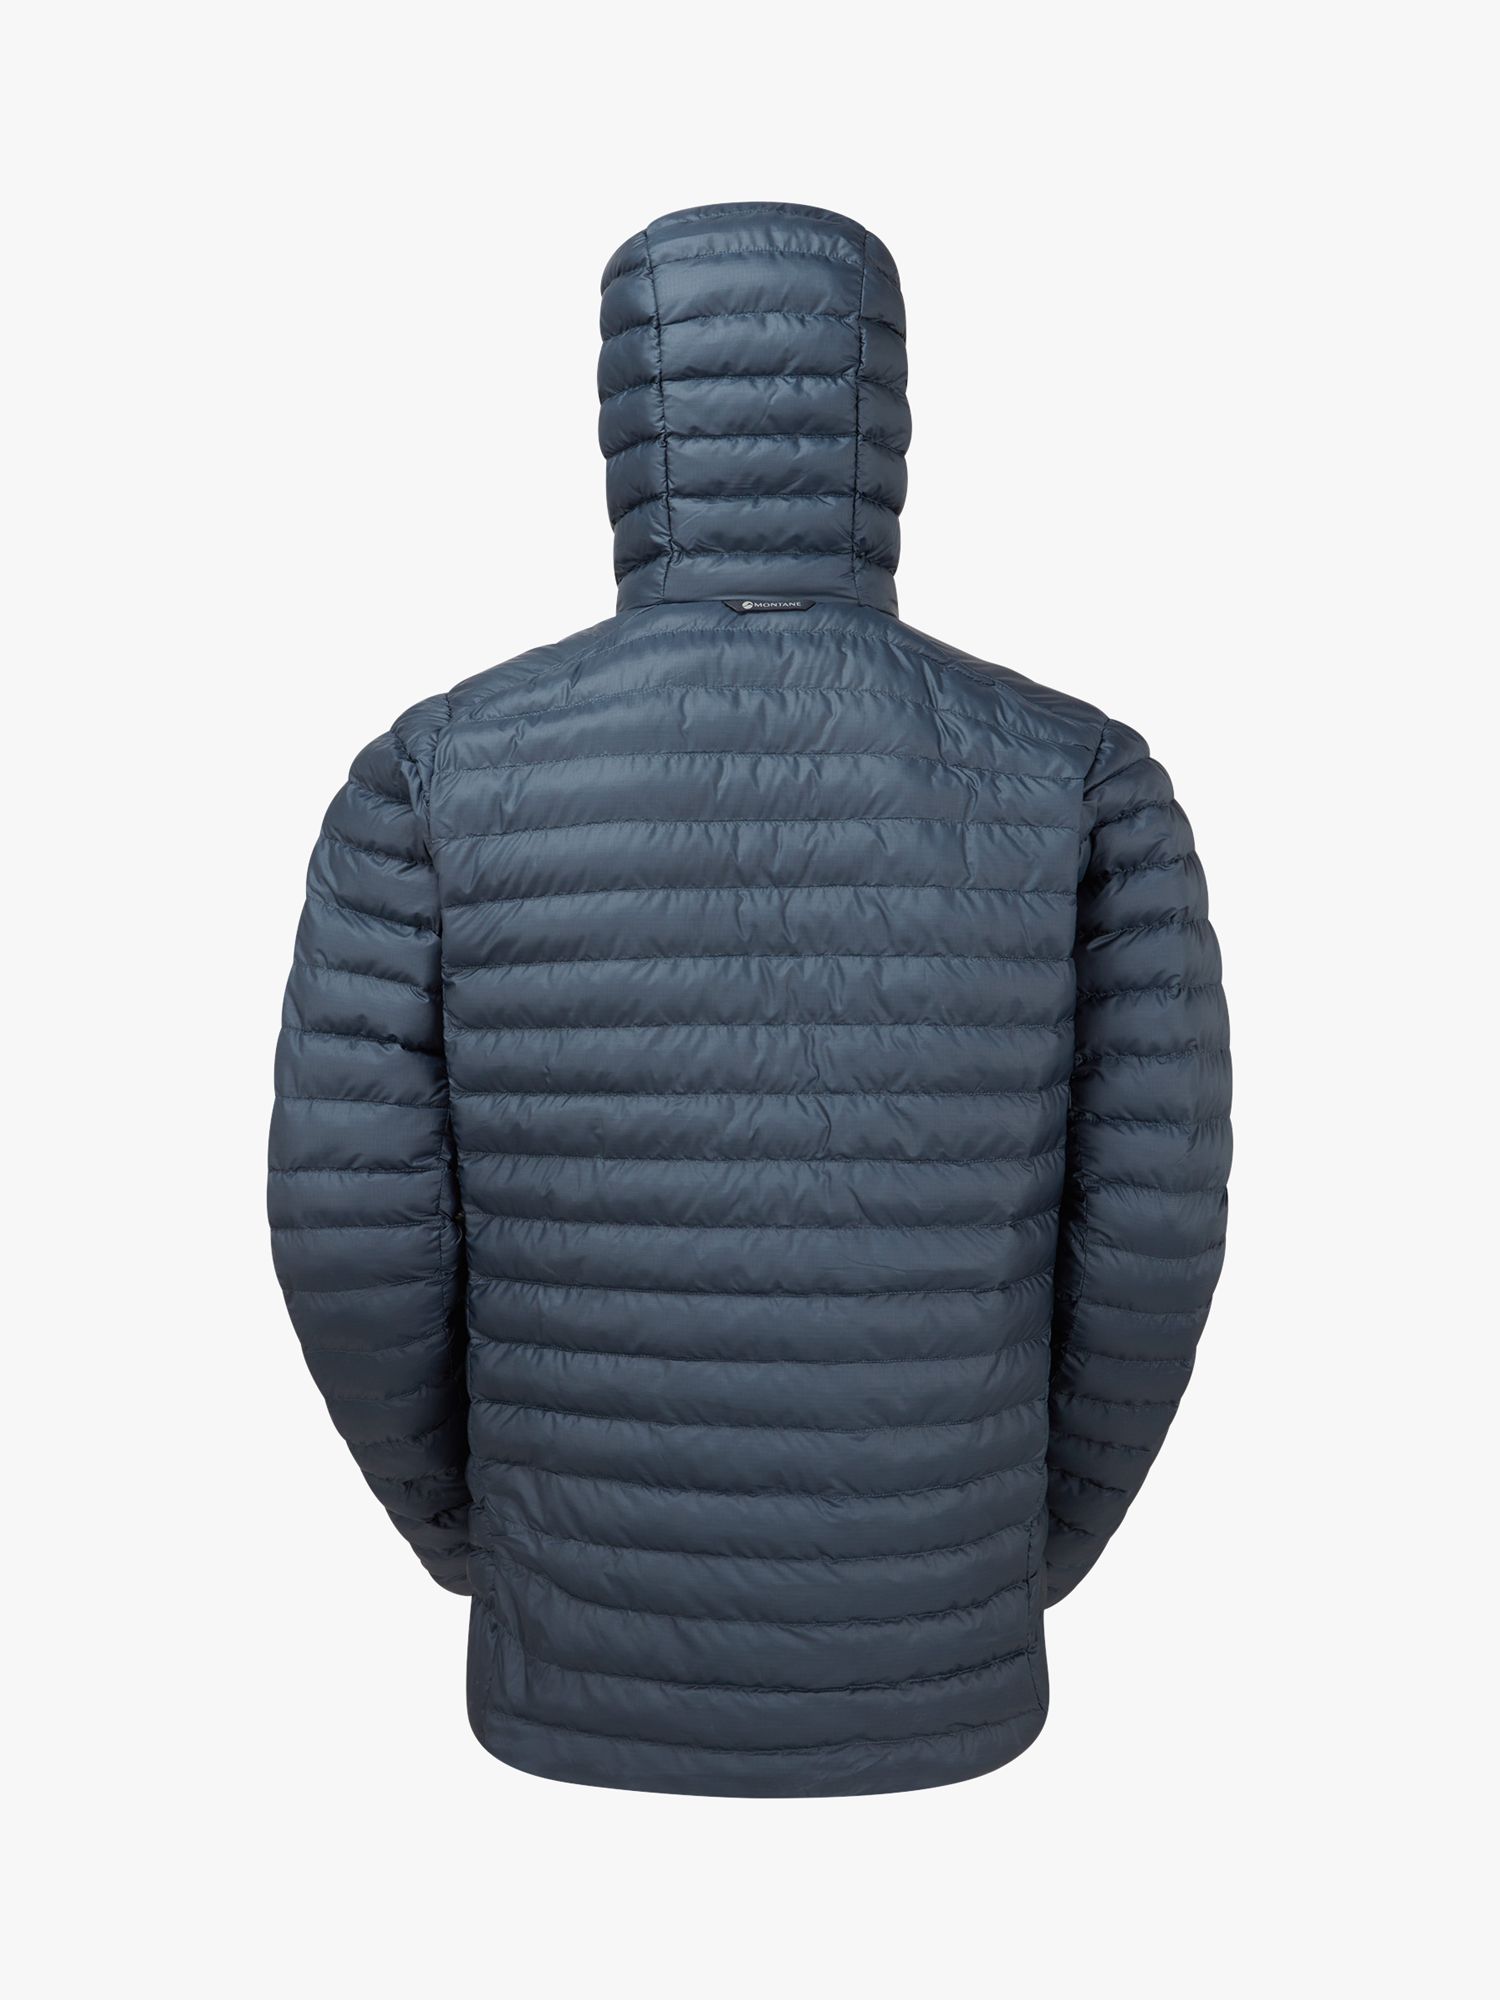 Montane Icarus Hooded Jacket, Eclipse Blue, M